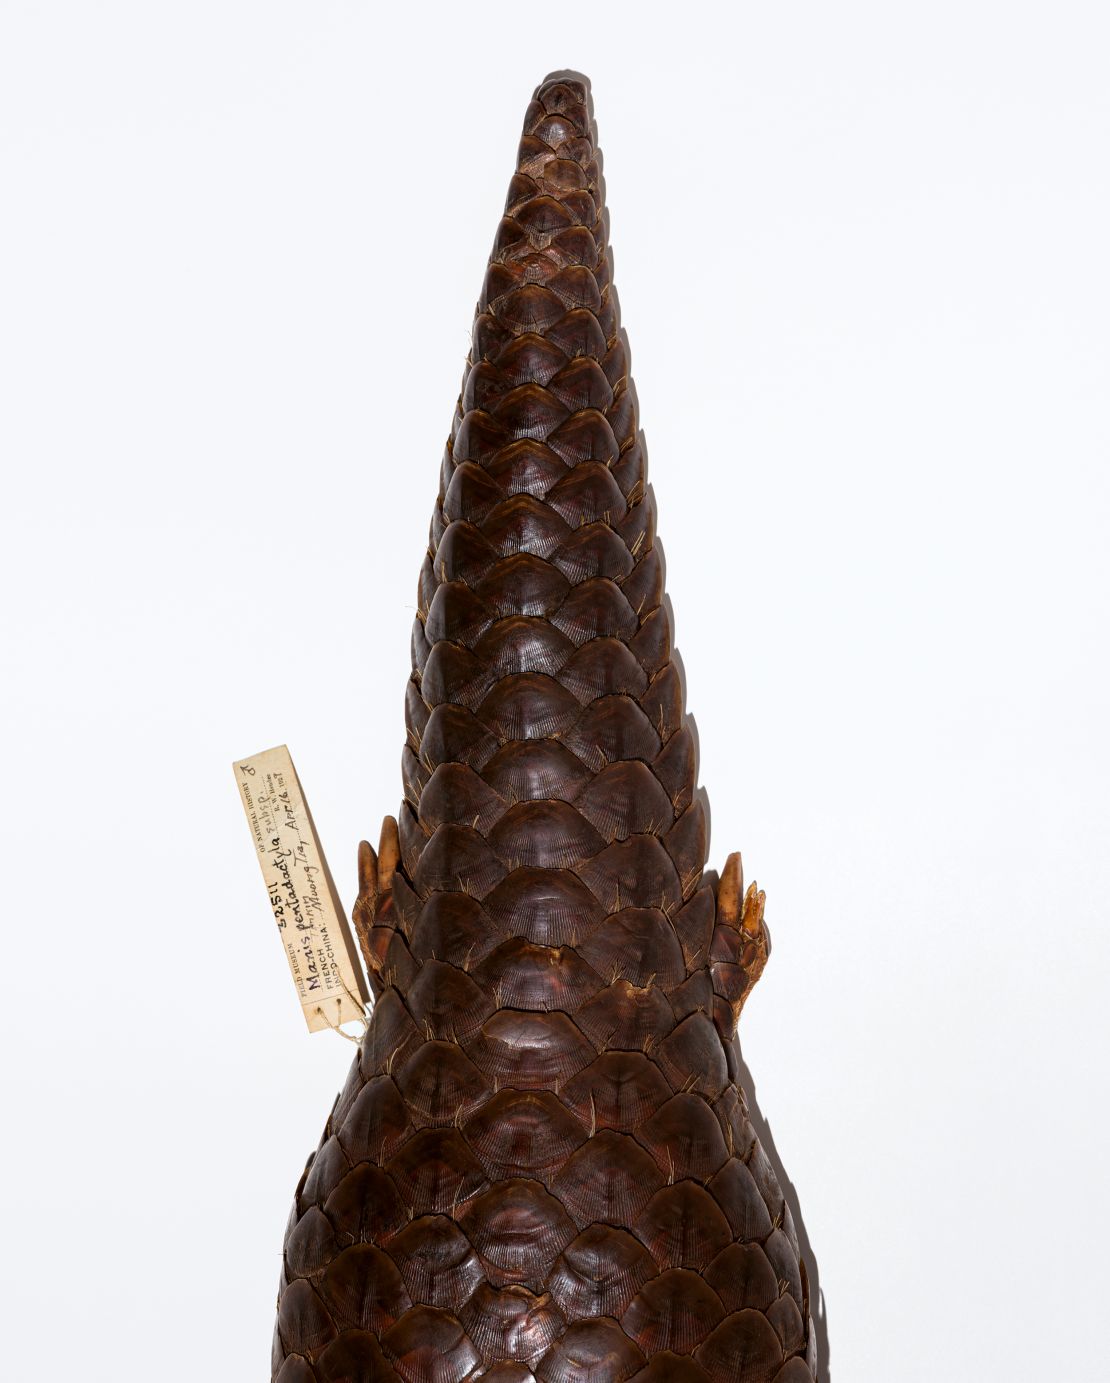 The Chinese pangolin (specimen from the Field Museum's collection) is critically endangered due to humans hunting its scales, meat and blood. 